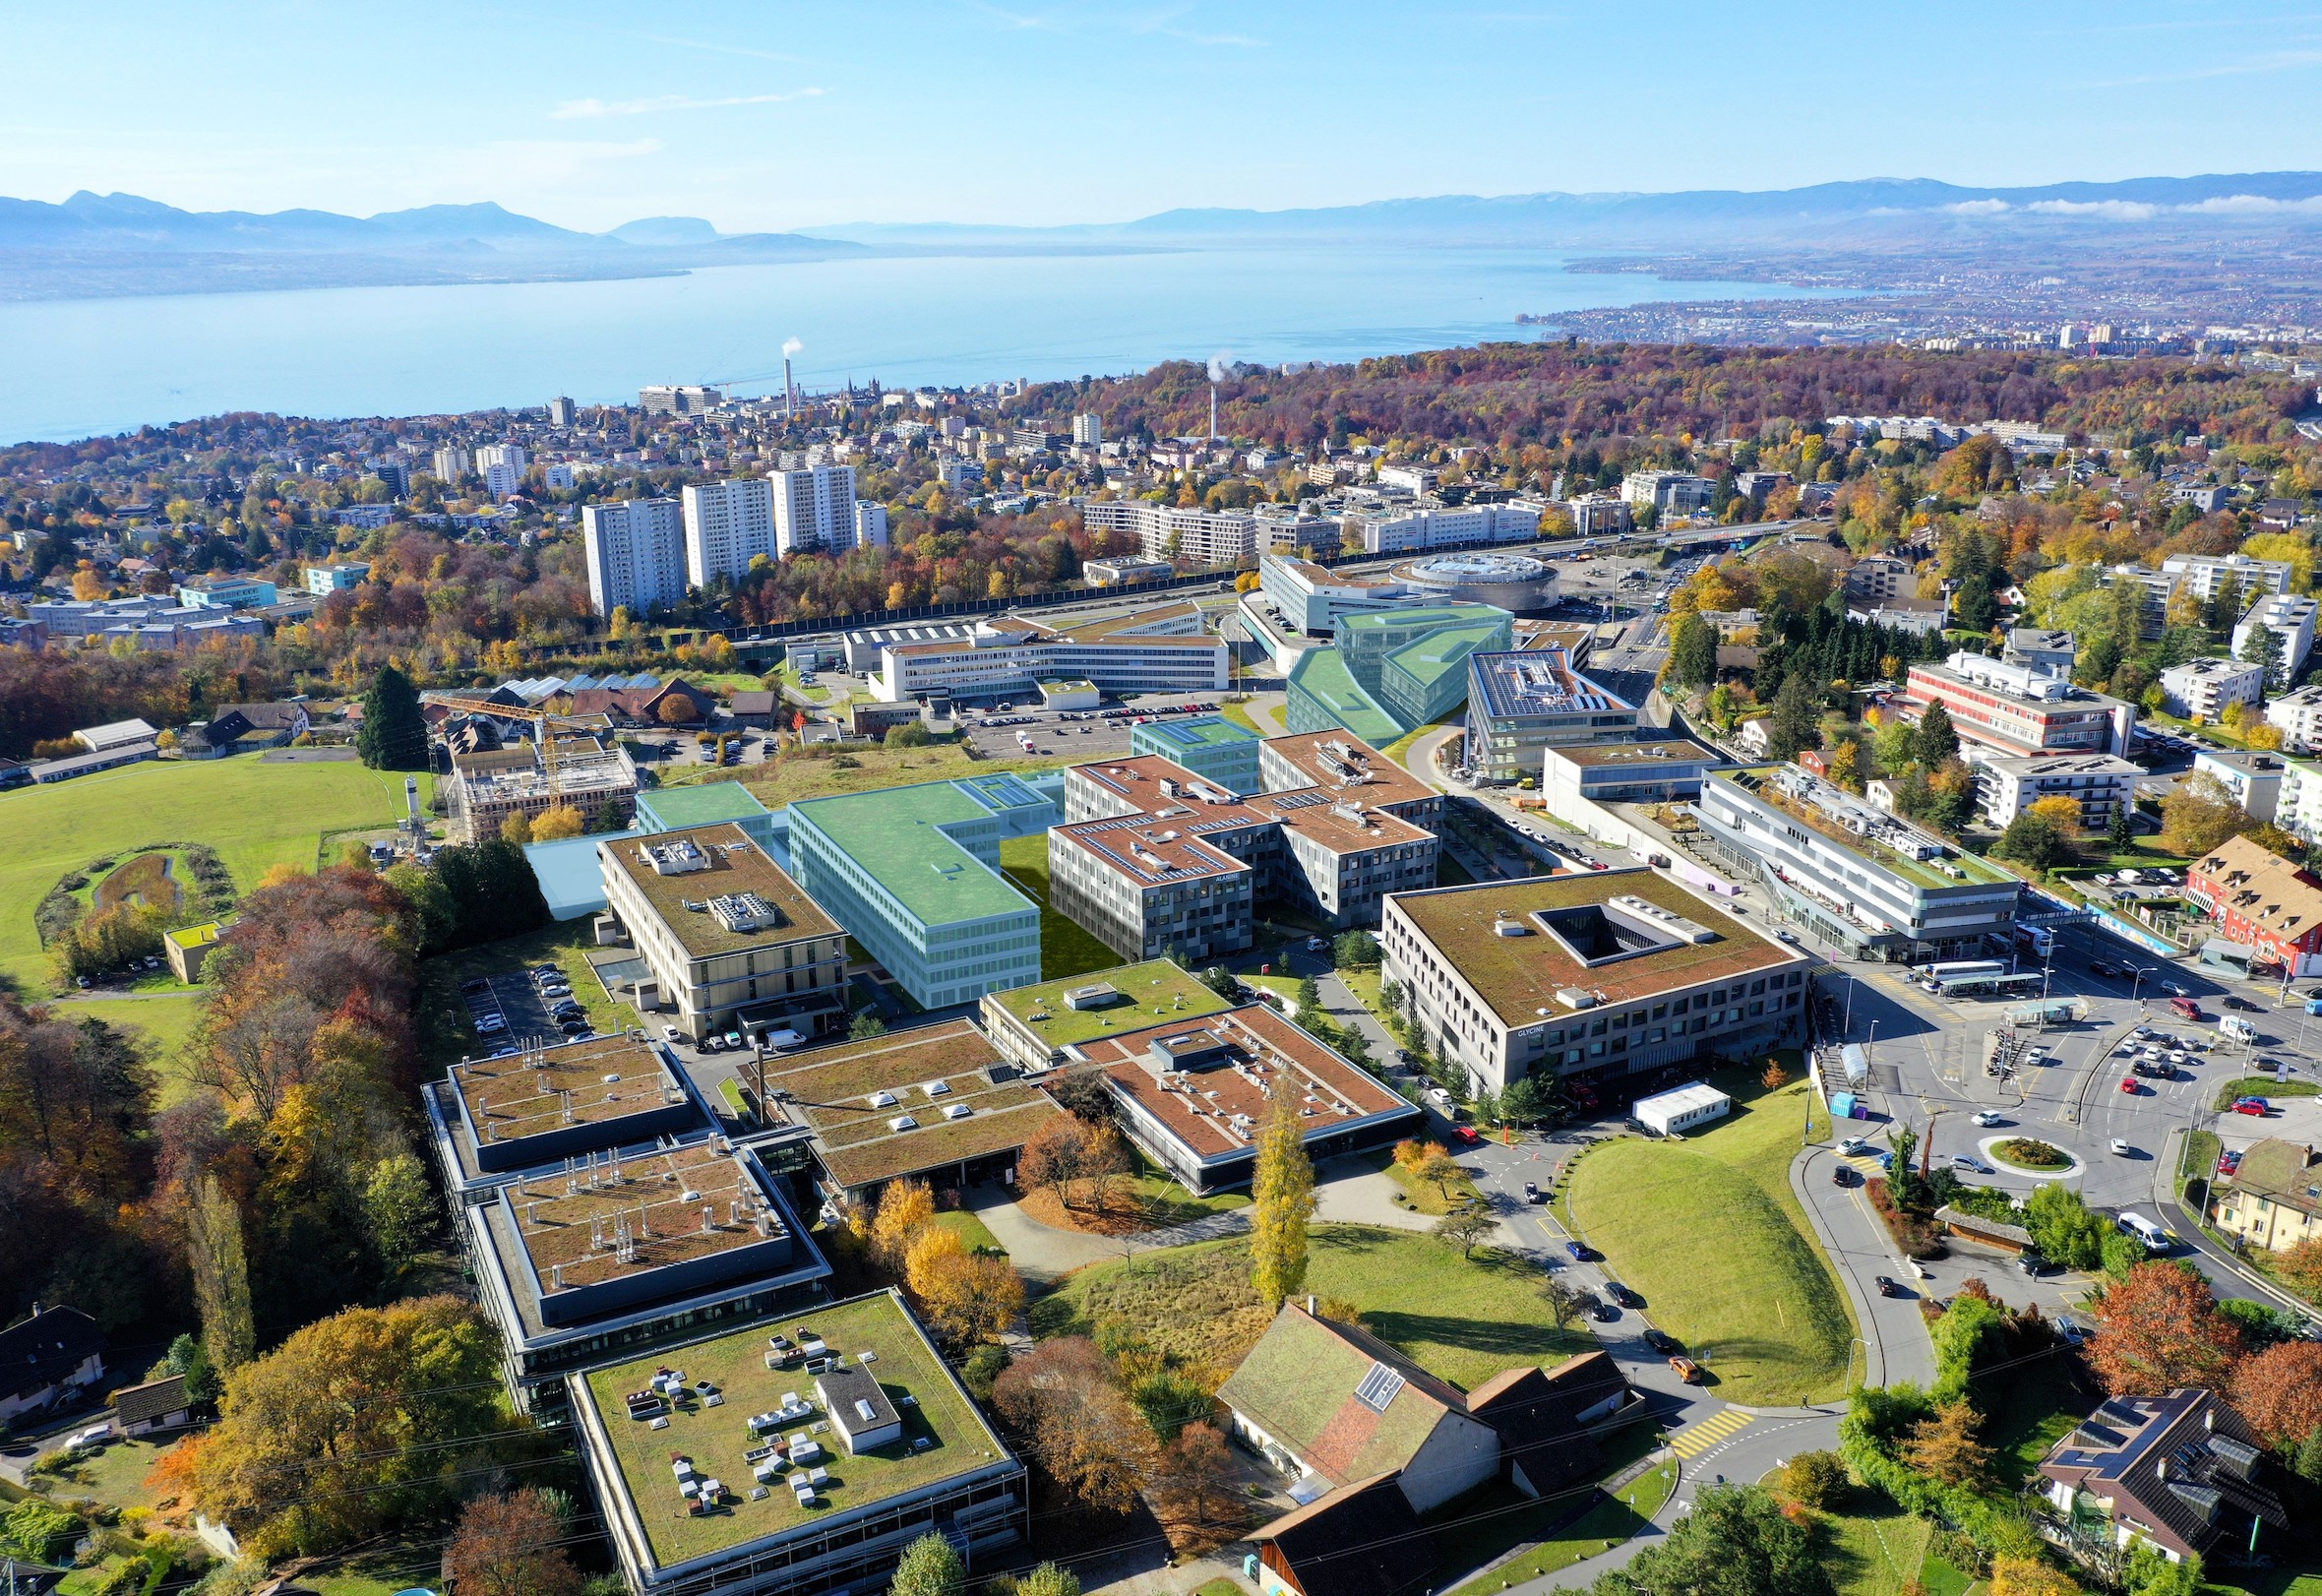 BioLizard’s move to Lausanne reflects its growing international presence and dedication to serving the Swiss biotech industry.